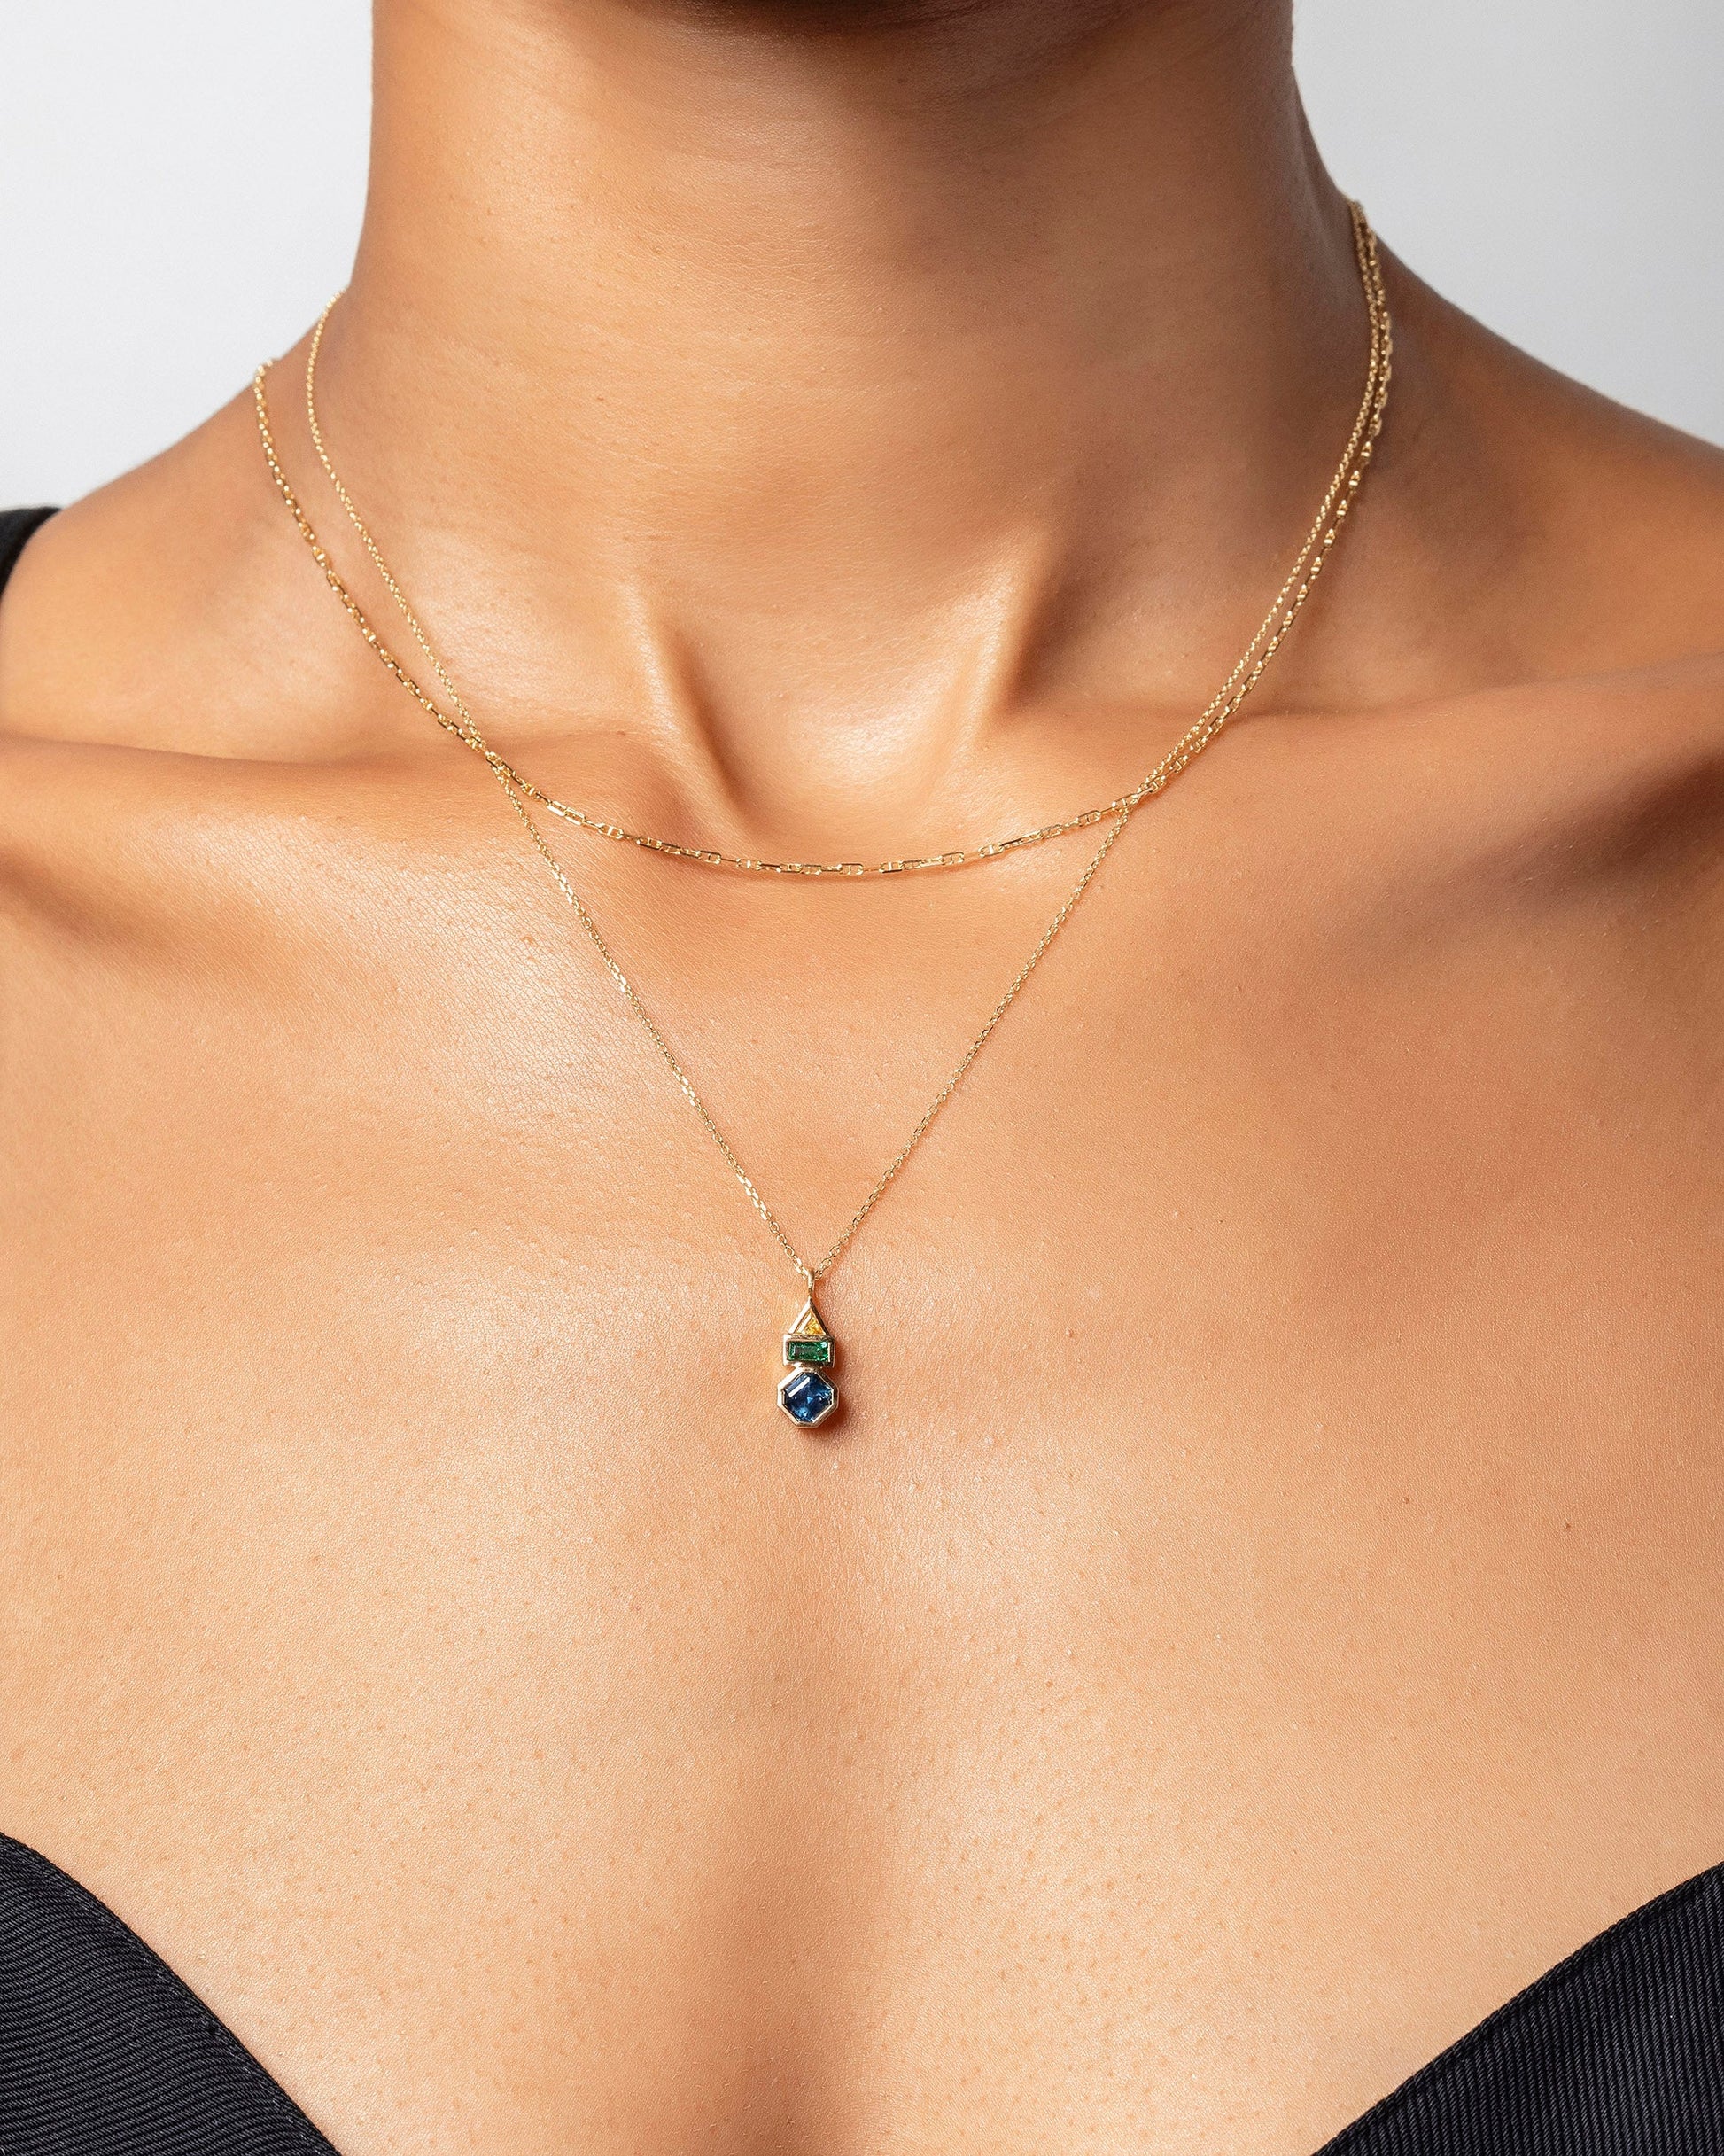 Positive Energy Necklace on model.